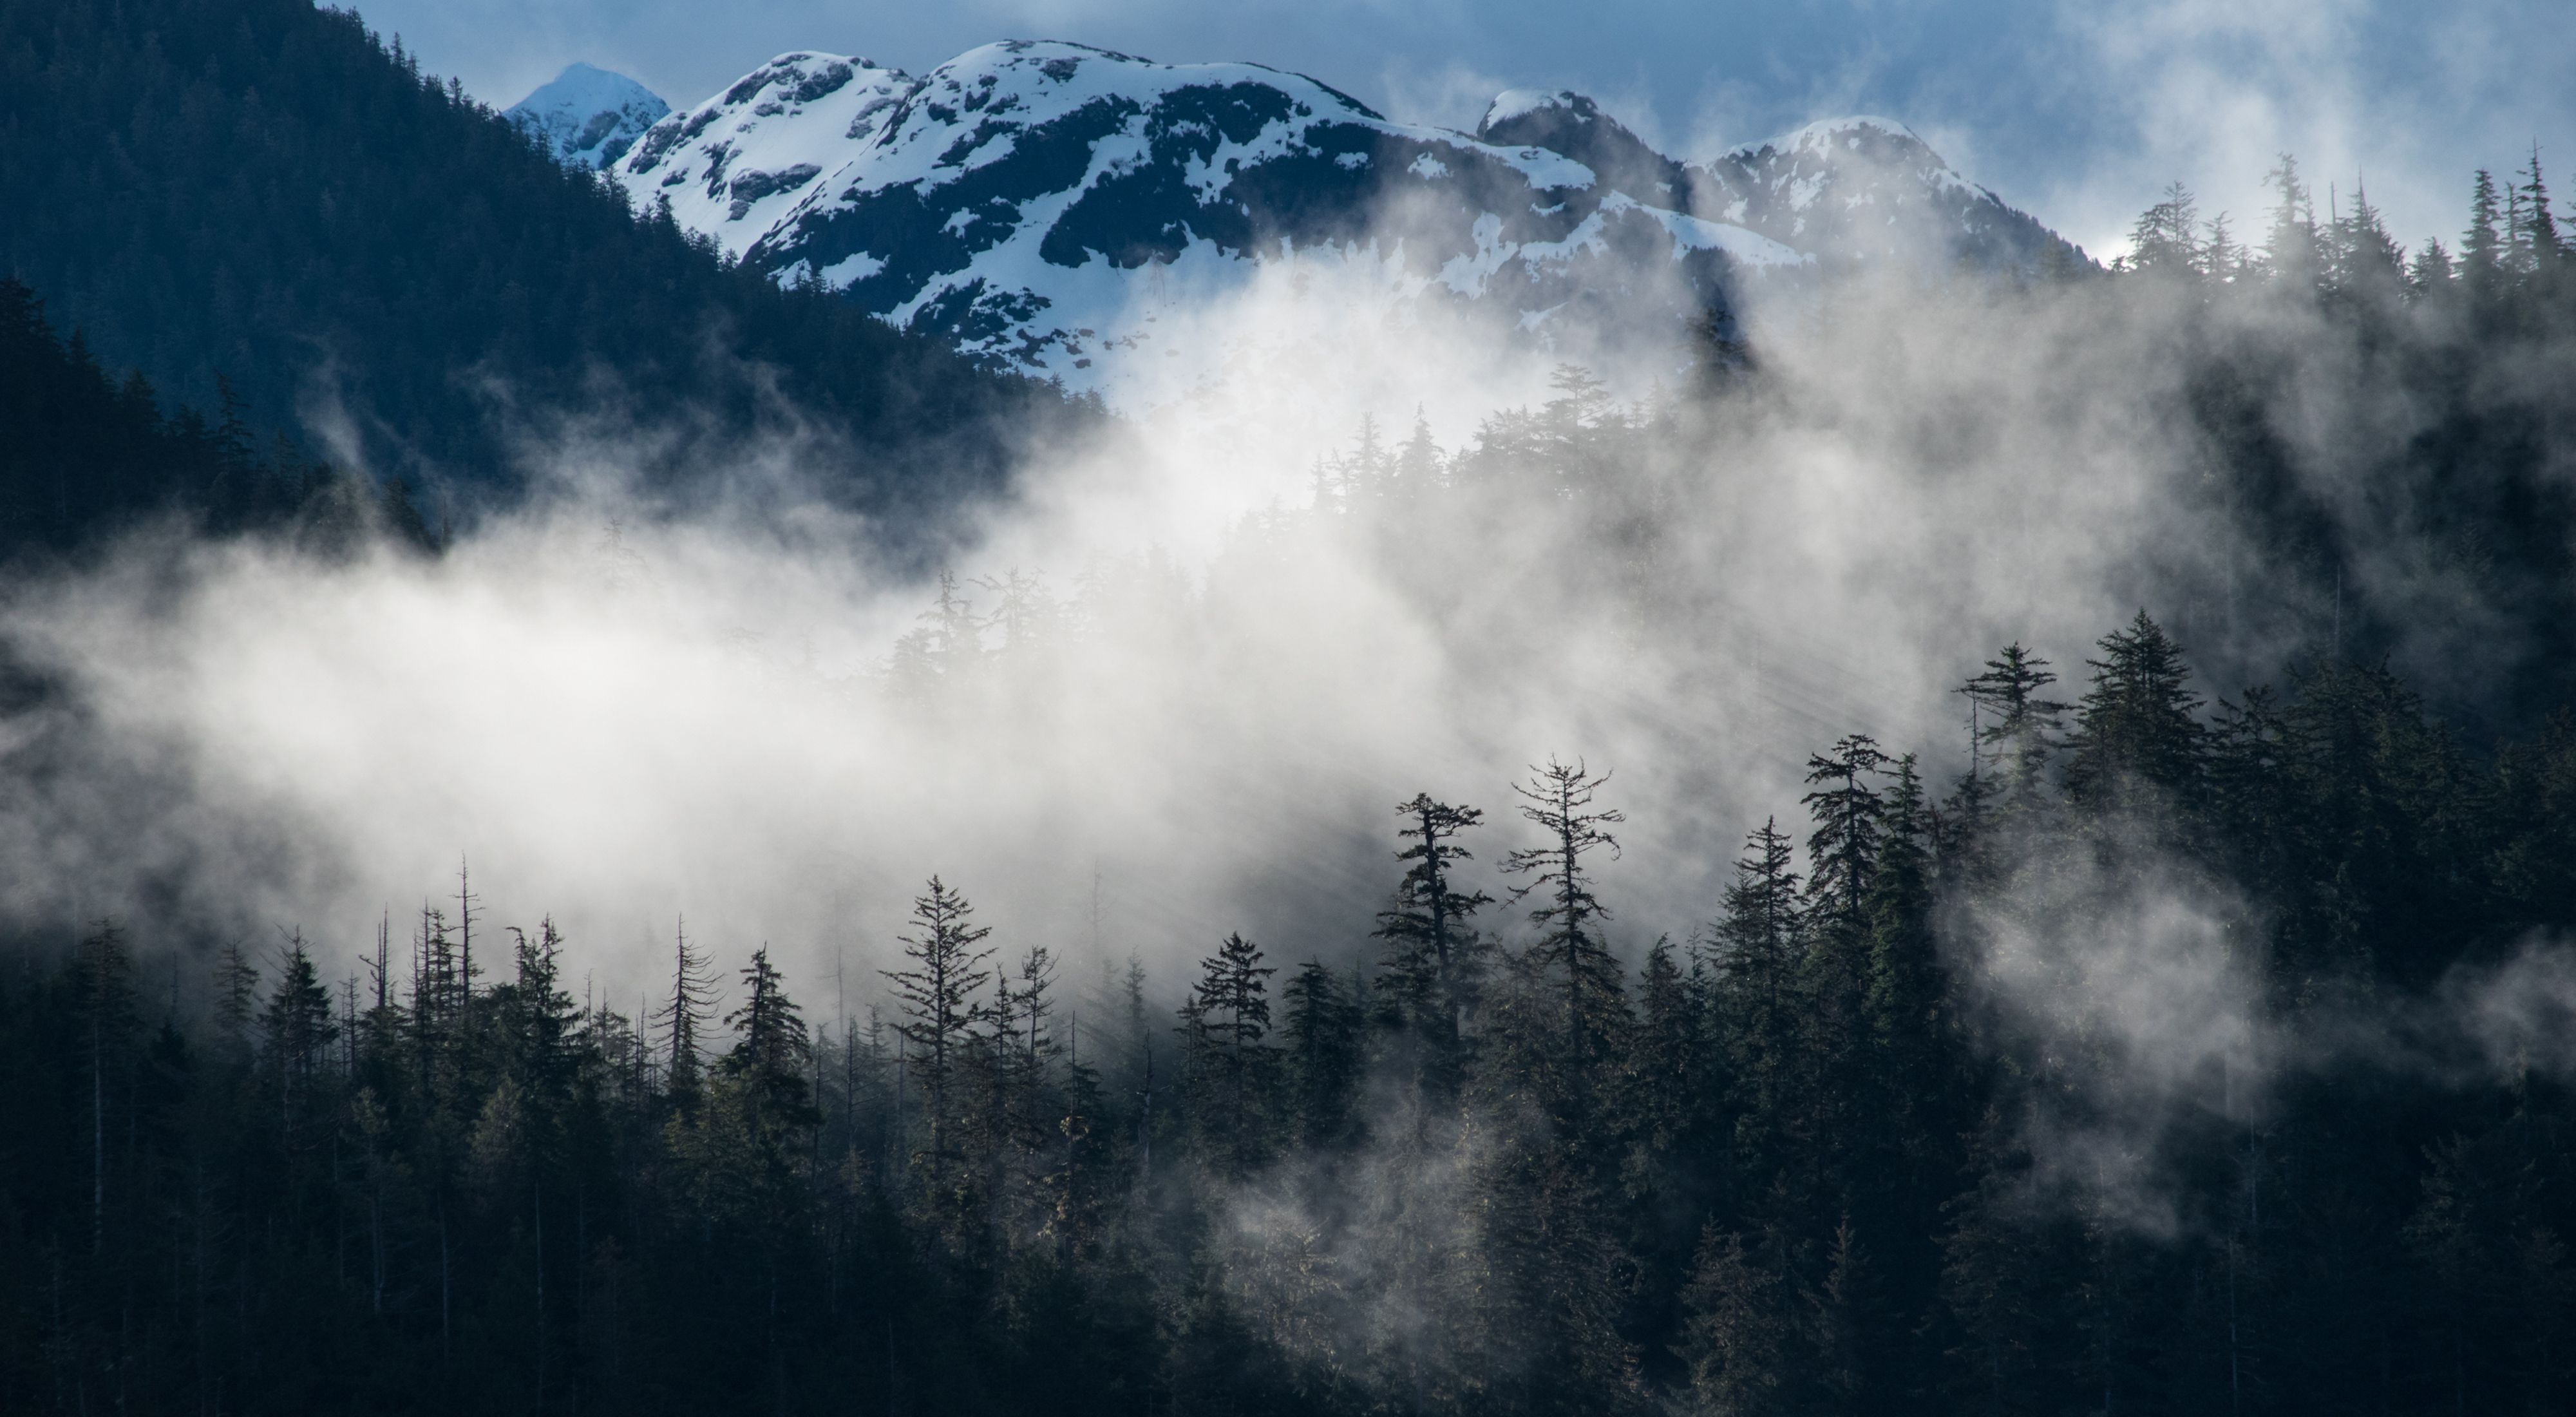 Photo of mountains and forests of Southeast Alaska, with fog intermixed in the mountains.